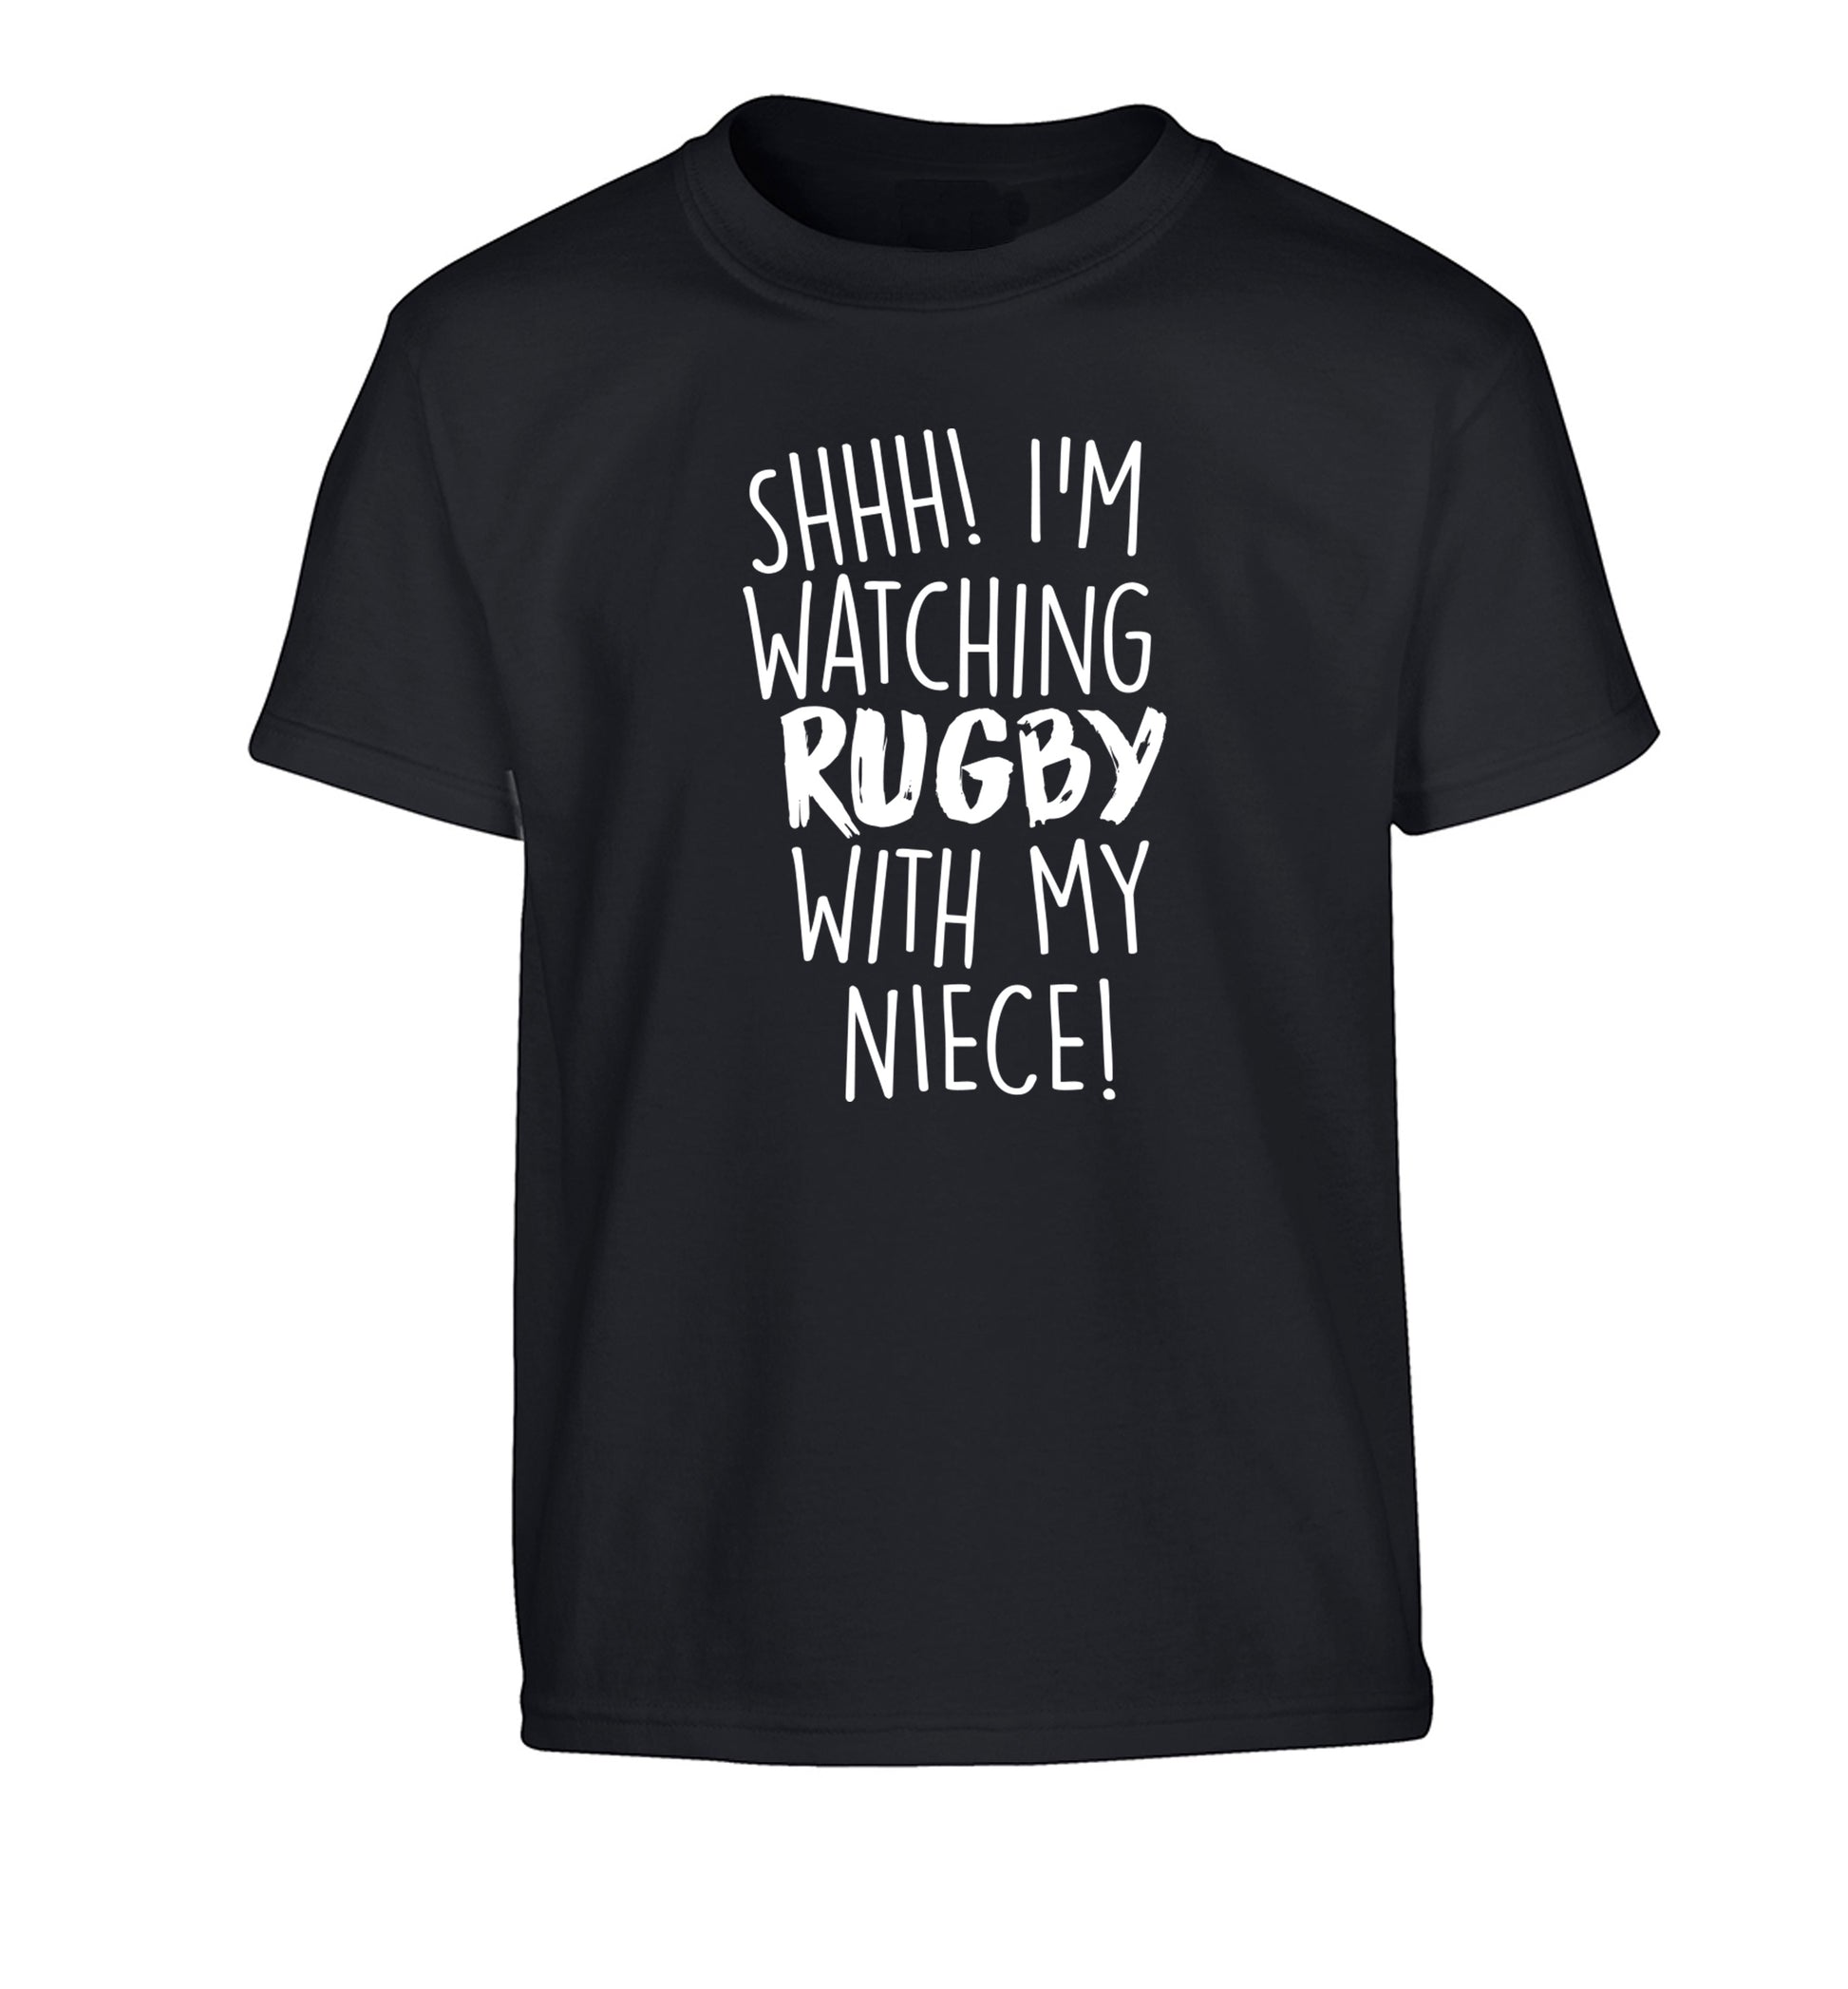 Shh.. I'm watching rugby with my niece Children's black Tshirt 12-13 Years